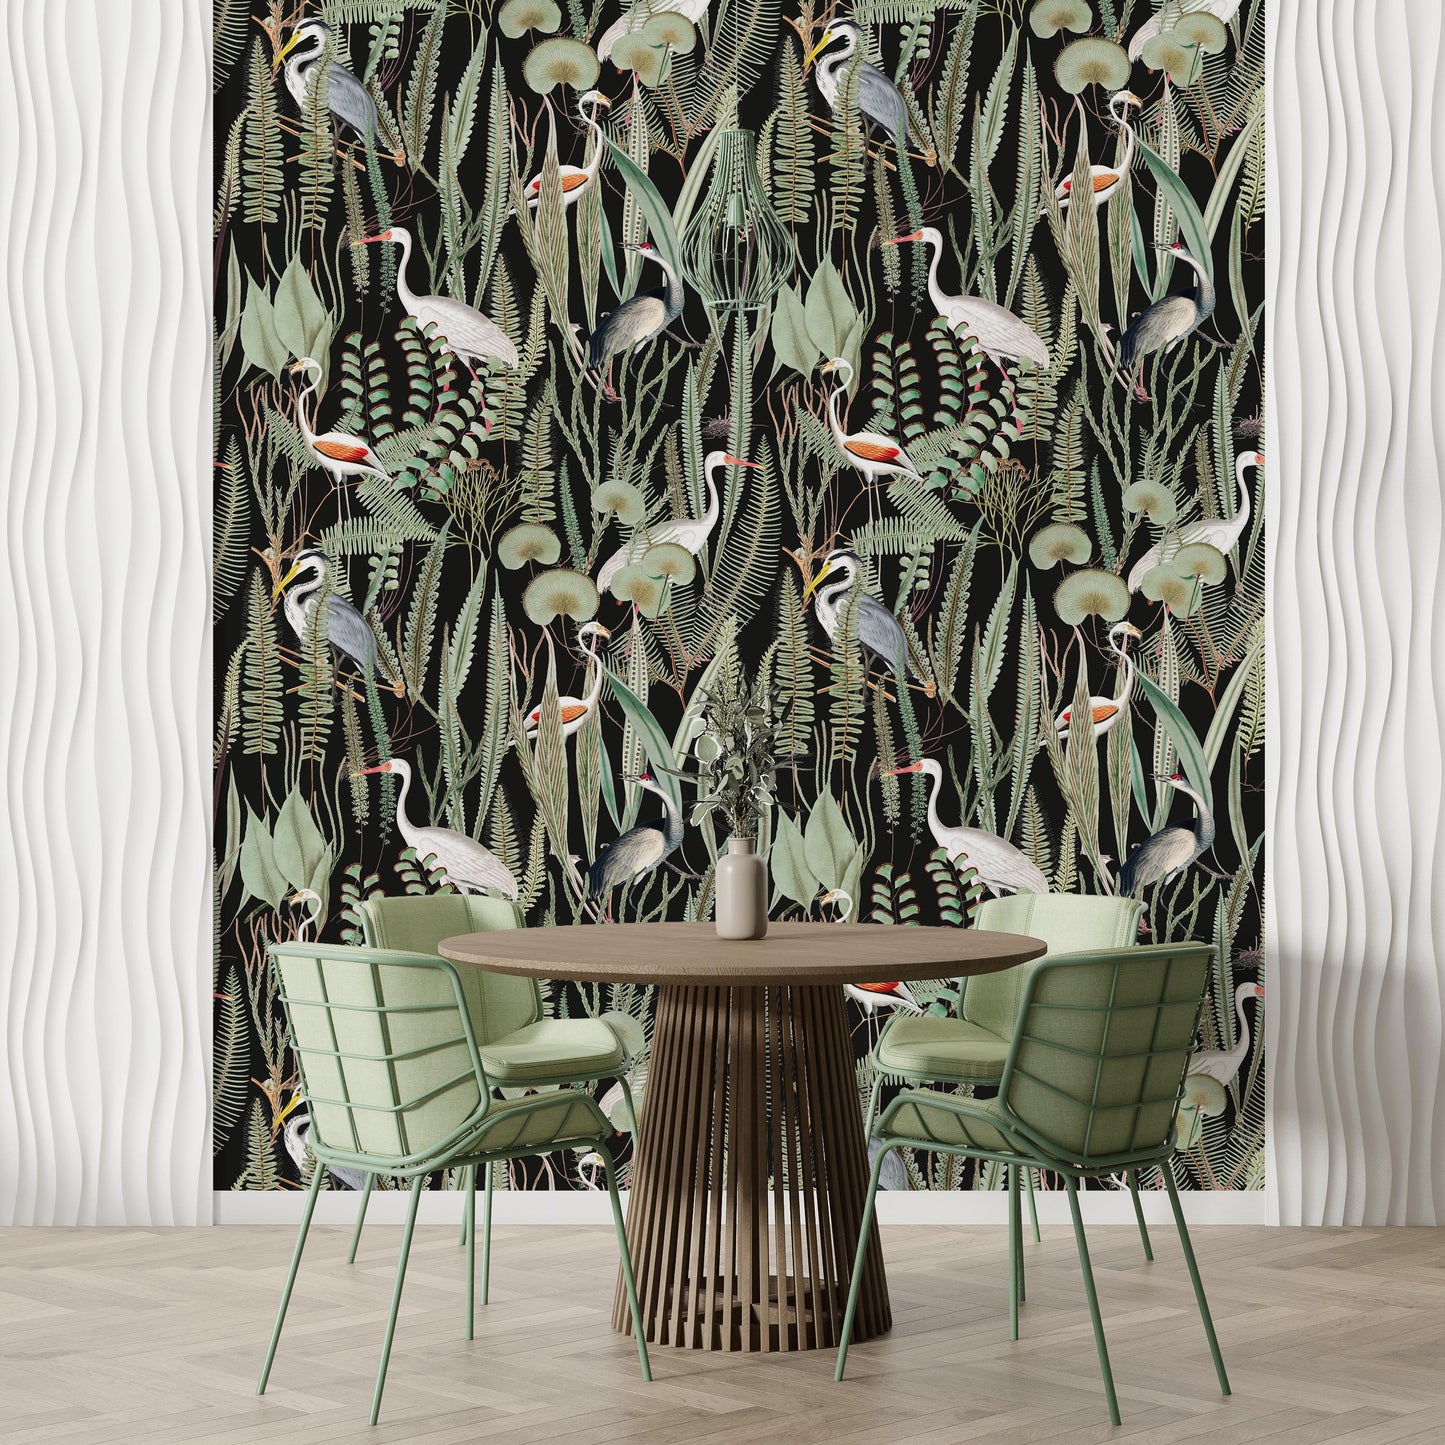 Enliven your dining room with the captivating beauty of our black background heron and botanical wallpaper. The vibrant floral patterns and majestic herons dance against the sophisticated black backdrop, creating a visually stunning backdrop for your dining experiences. Pair the wallpaper with green chairs and a wooden round table, adding a touch of warmth and sophistication to your dining space.